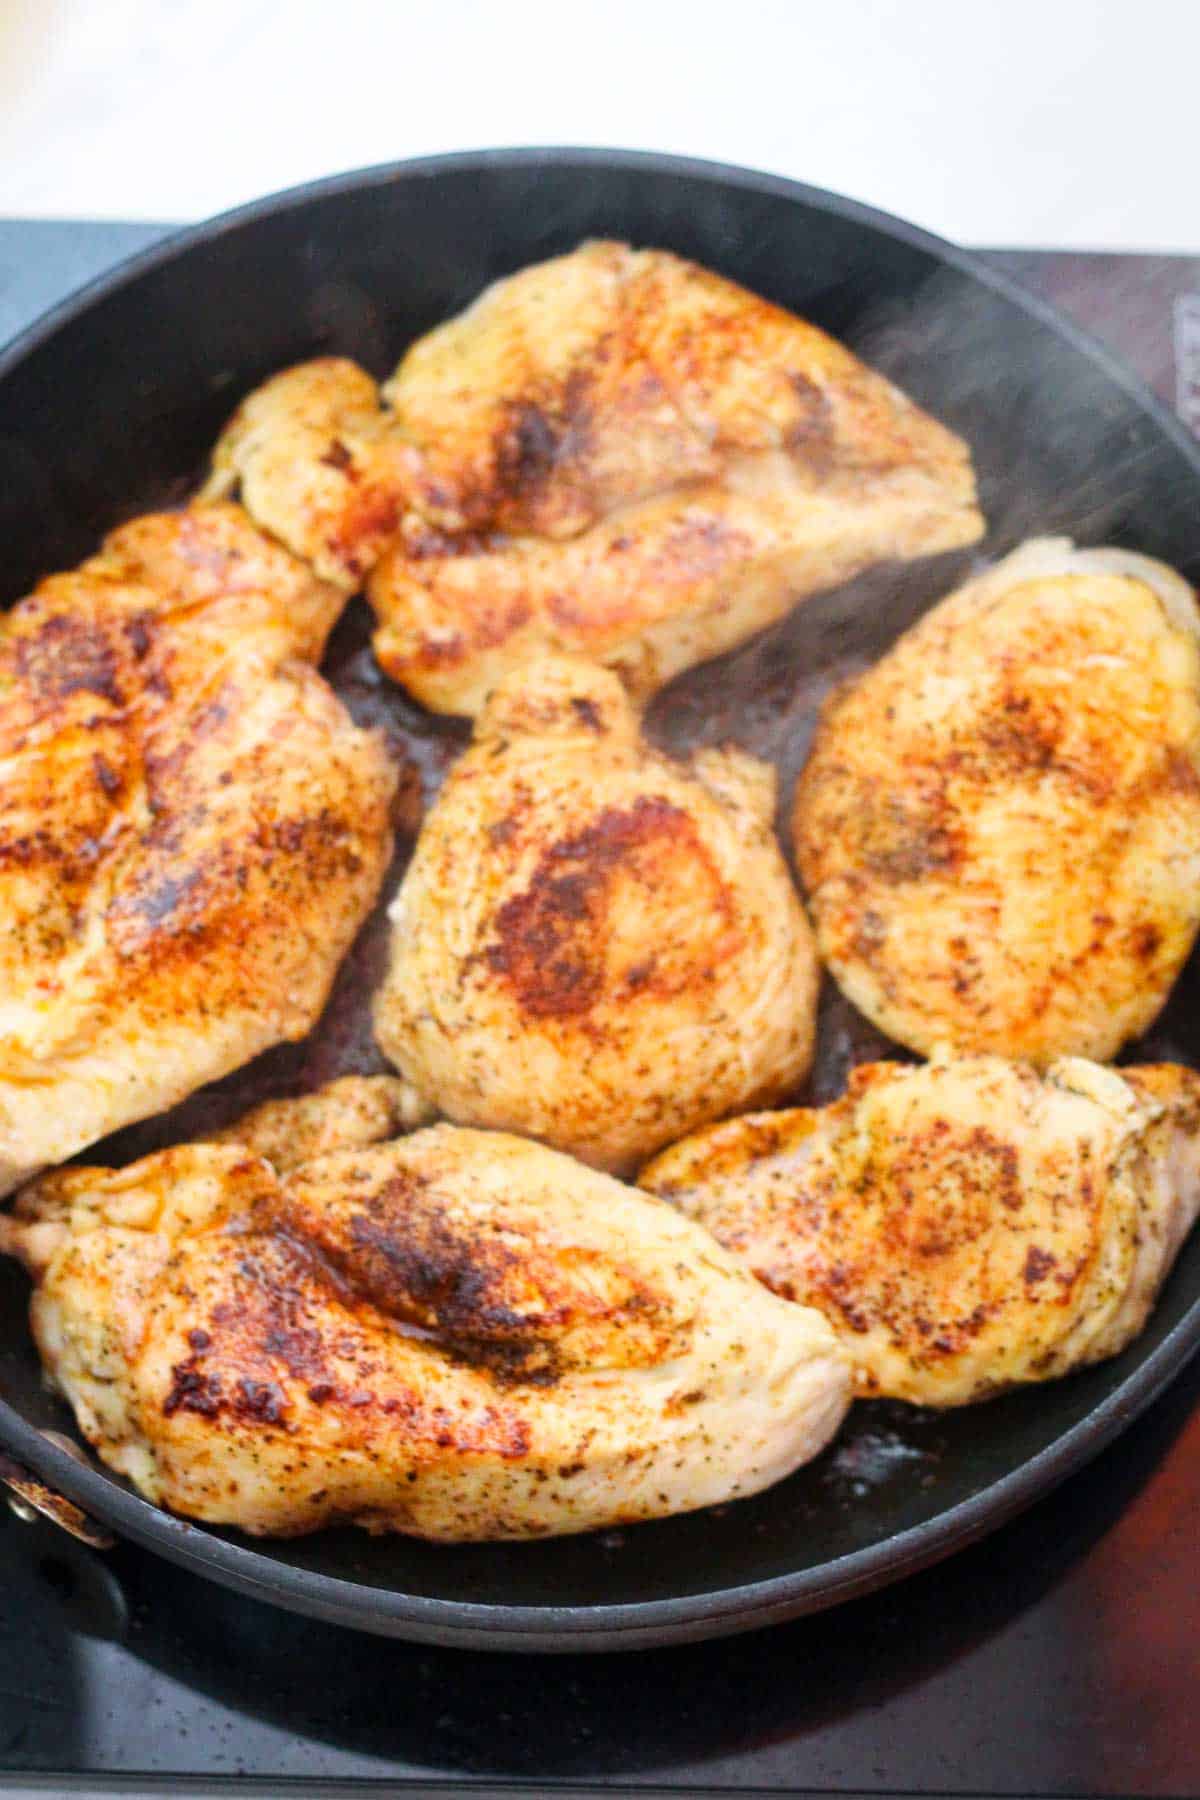 Searing chicken on the other side in the skillet.